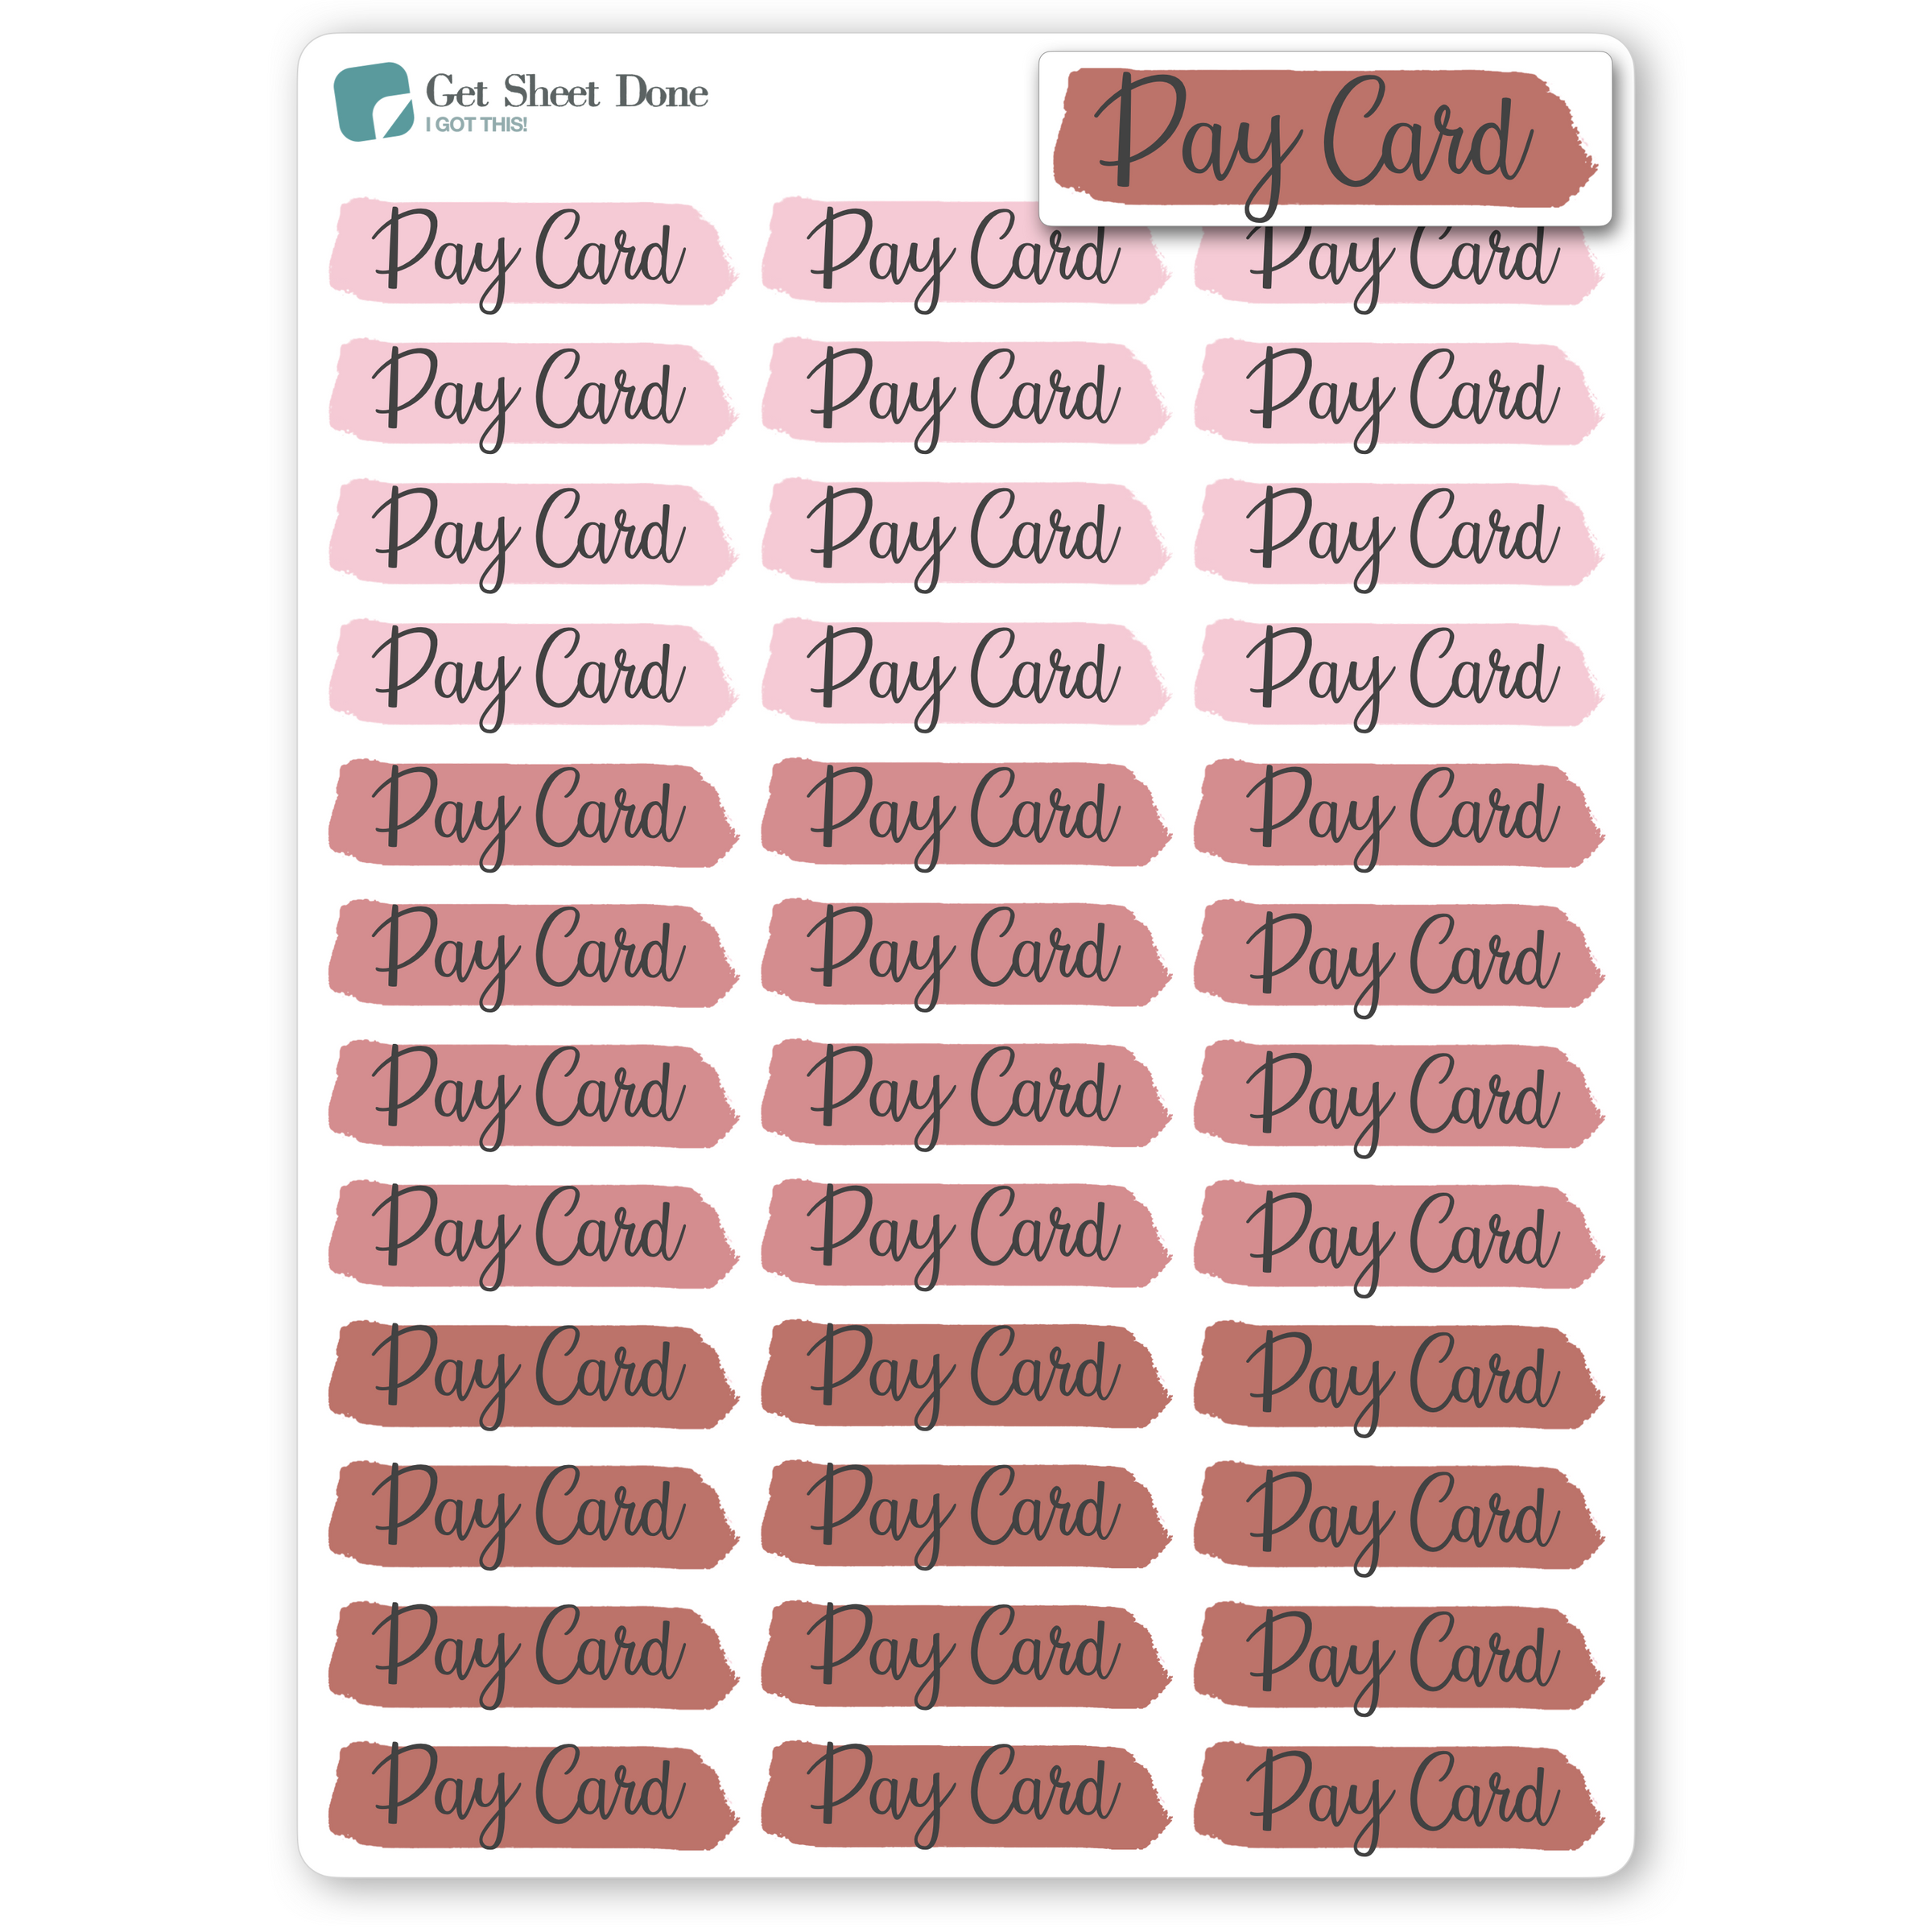 Highlight Pay Card Stickers